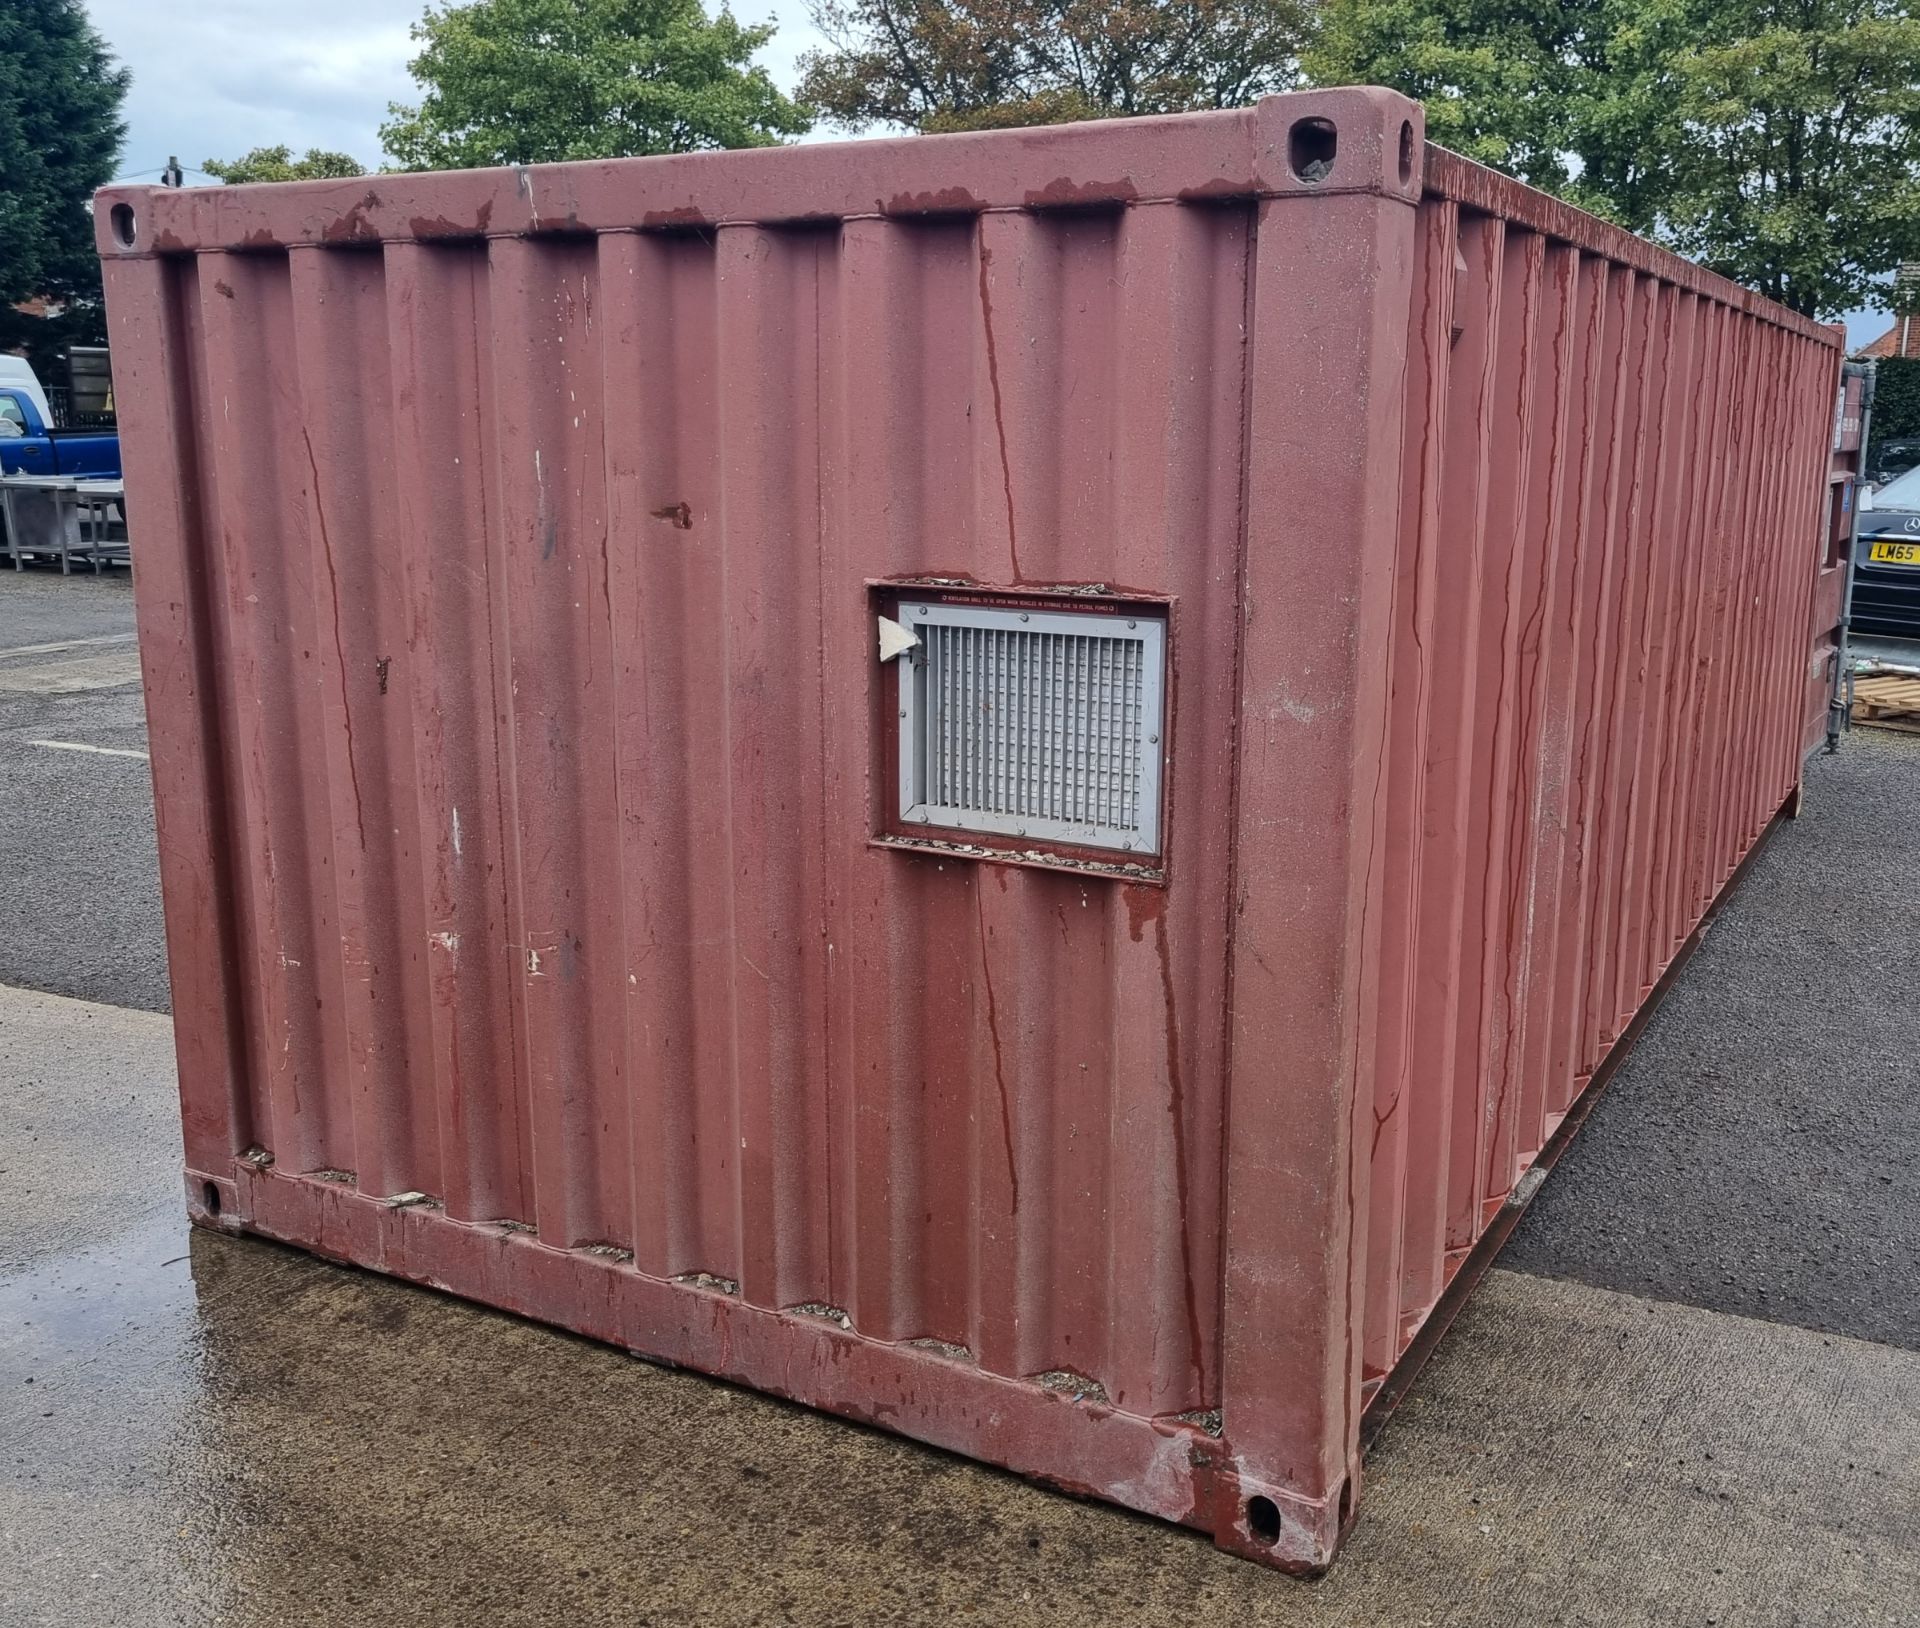 Stonehaven Engineering Ltd transportable storage container ISO 499/99/01 - dimensions: 20ft x 8ft x - Image 2 of 6